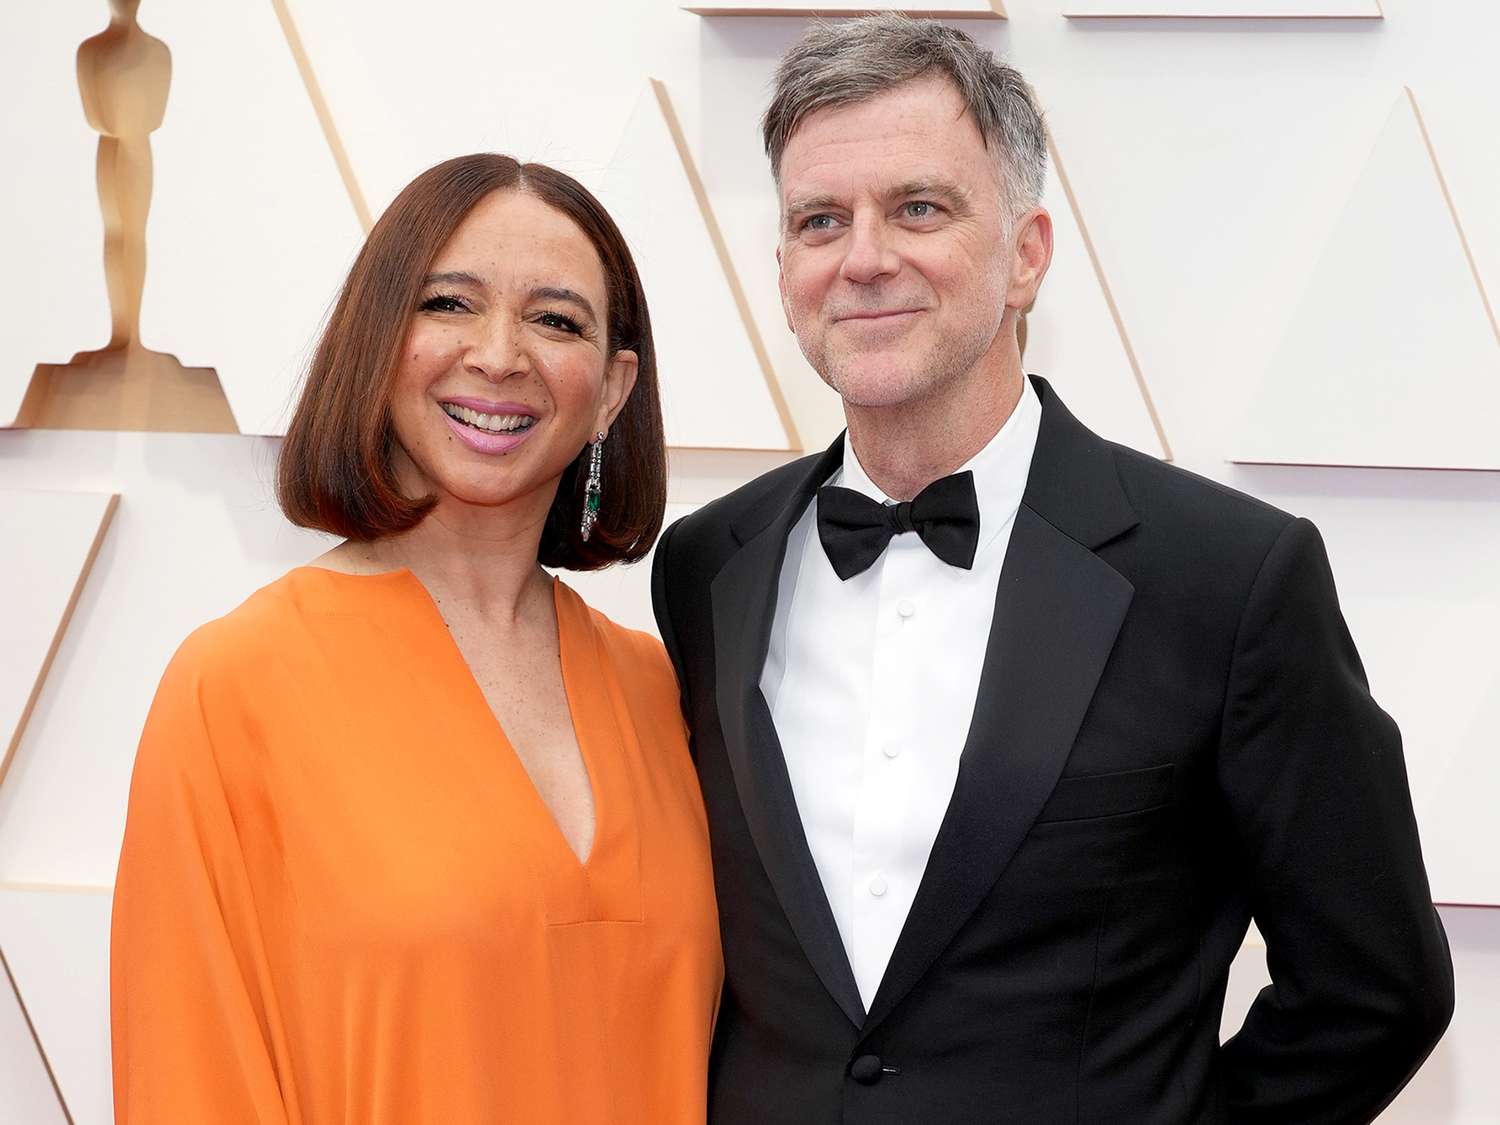 Maya Rudolph Says Husband Paul Thomas Anderson Knew He Was 'Going to Marry' Her After Seeing Her in a Sketch